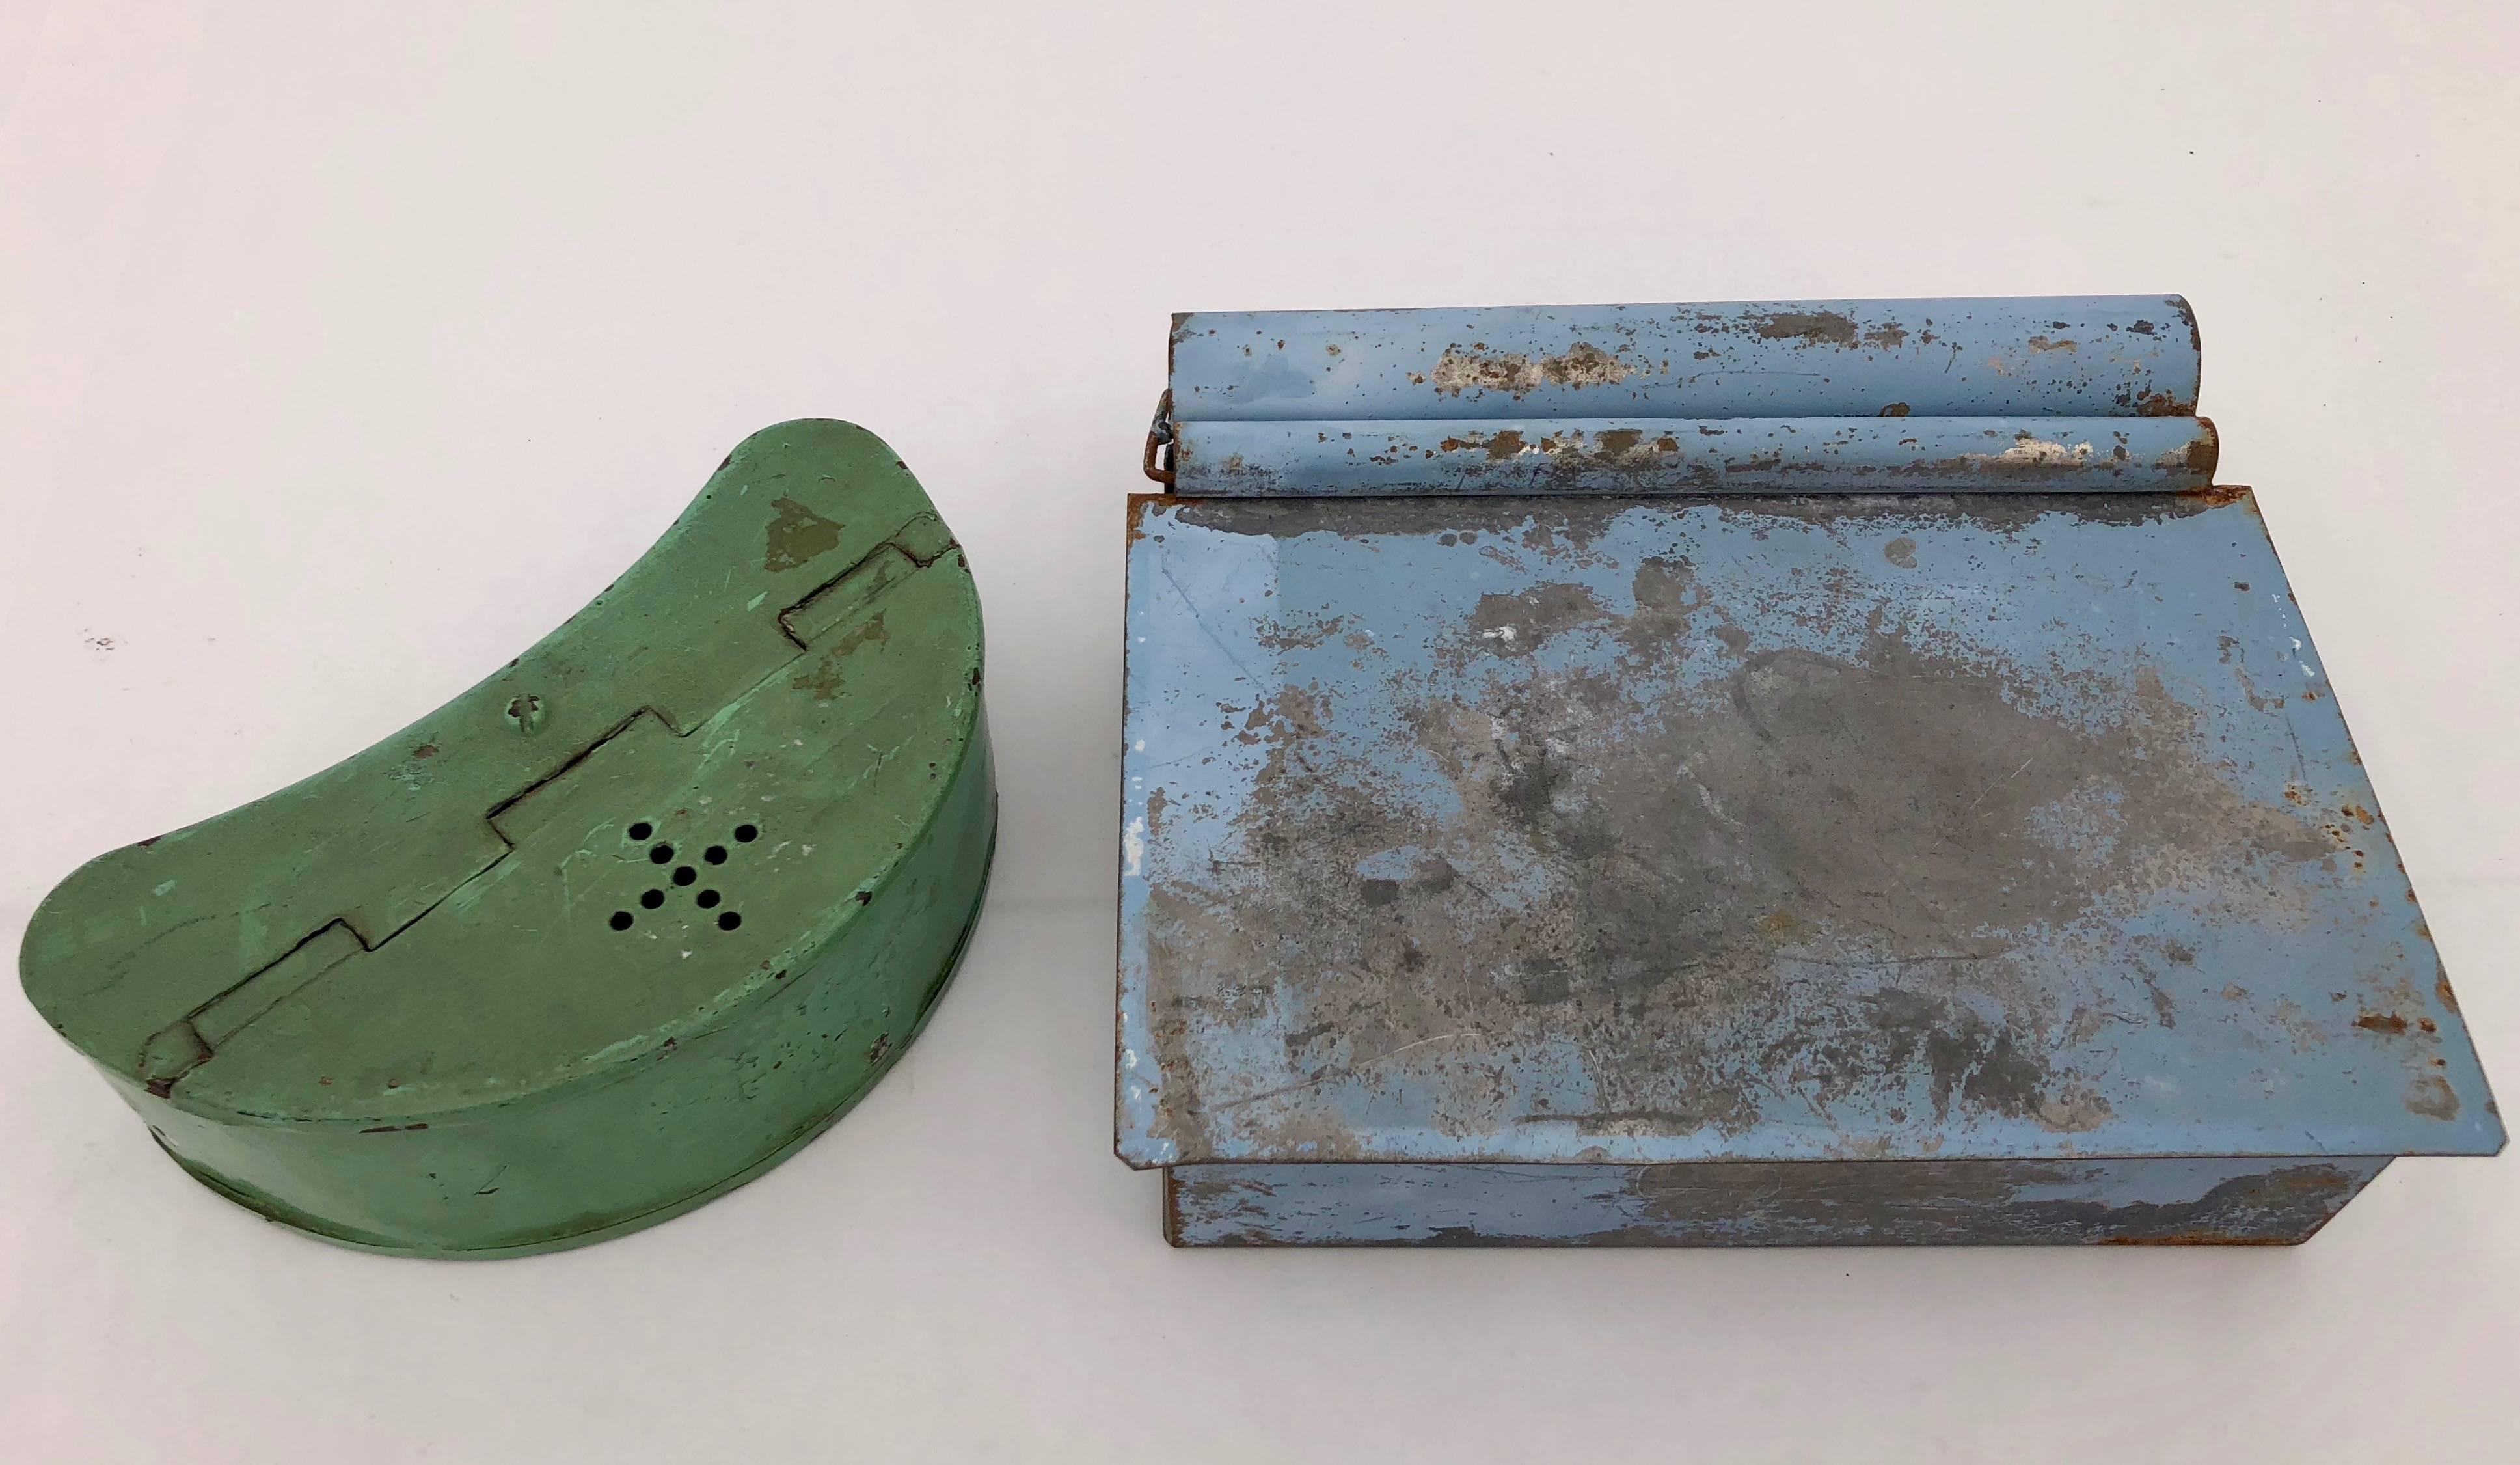 This is a set of tin boxes with their aged patina. Two have hand-painted flowers on them. The set of four hinged boxes include one that is blue, green, yellow and brown

Sizes:
Largest: 6.5 x 7.5 x 2.5
Smallest: 3 x 6 x 2.